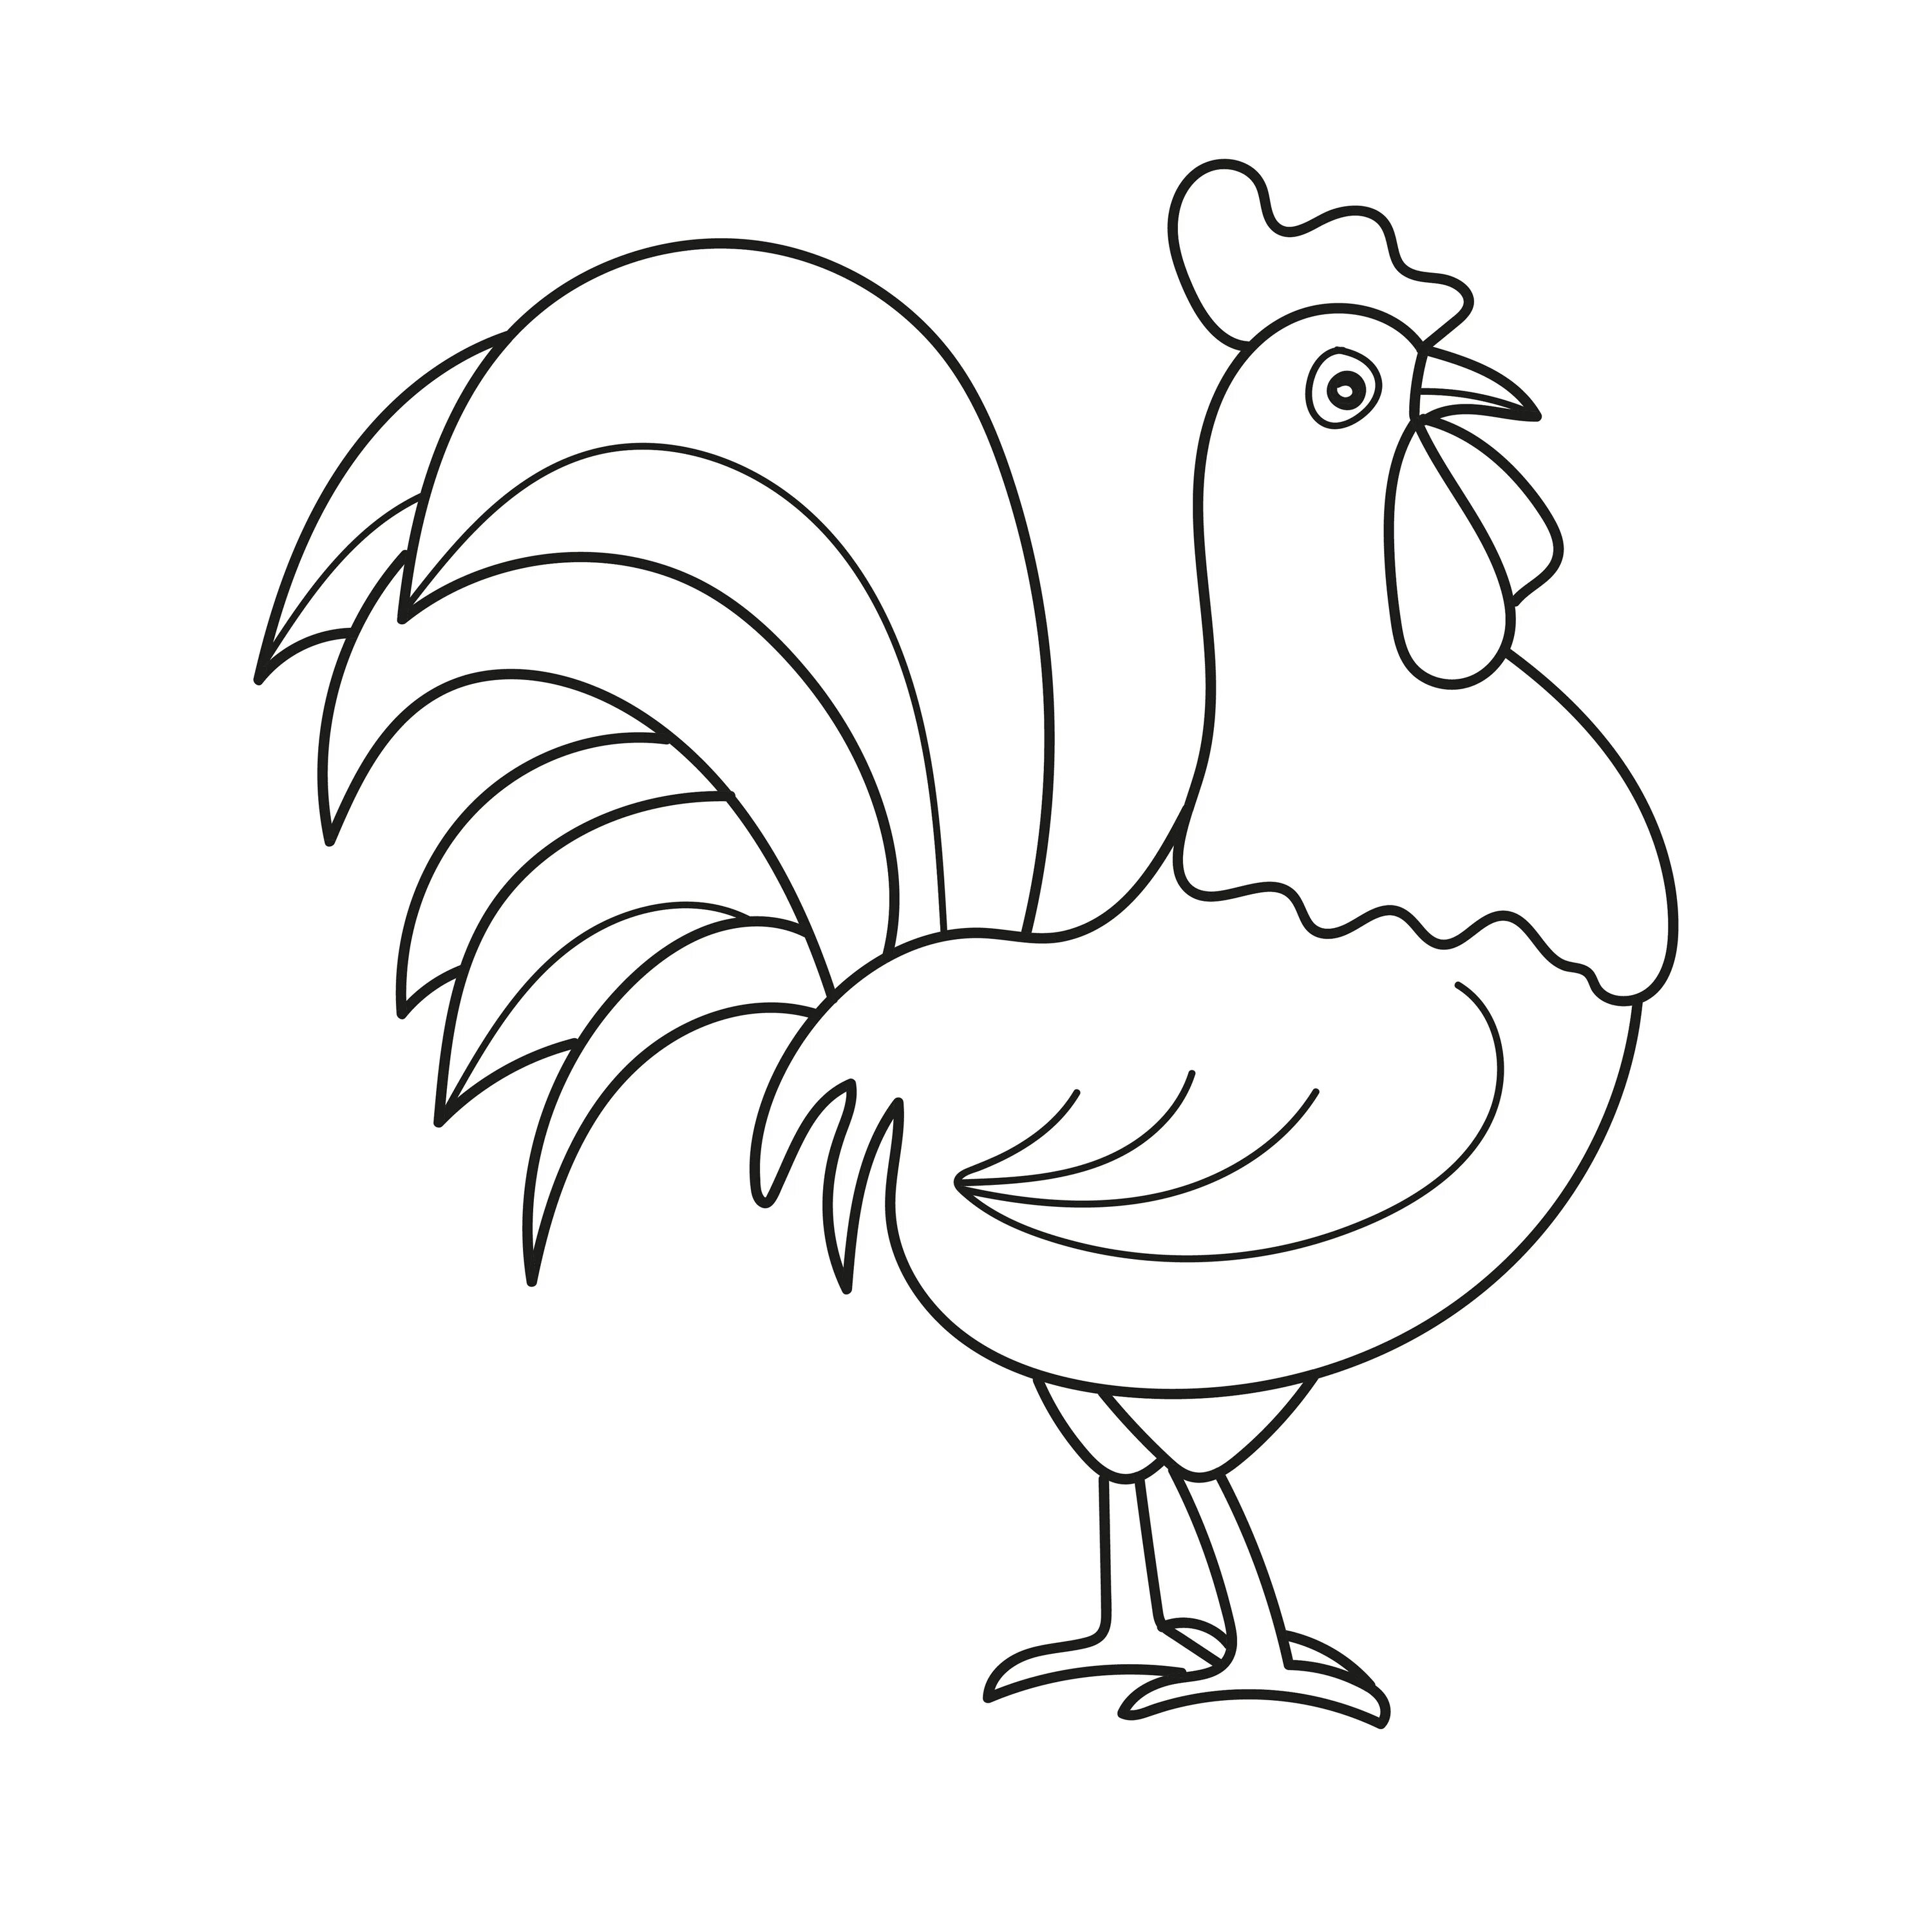 Coloring page friendly rooster for children 6-7 years old